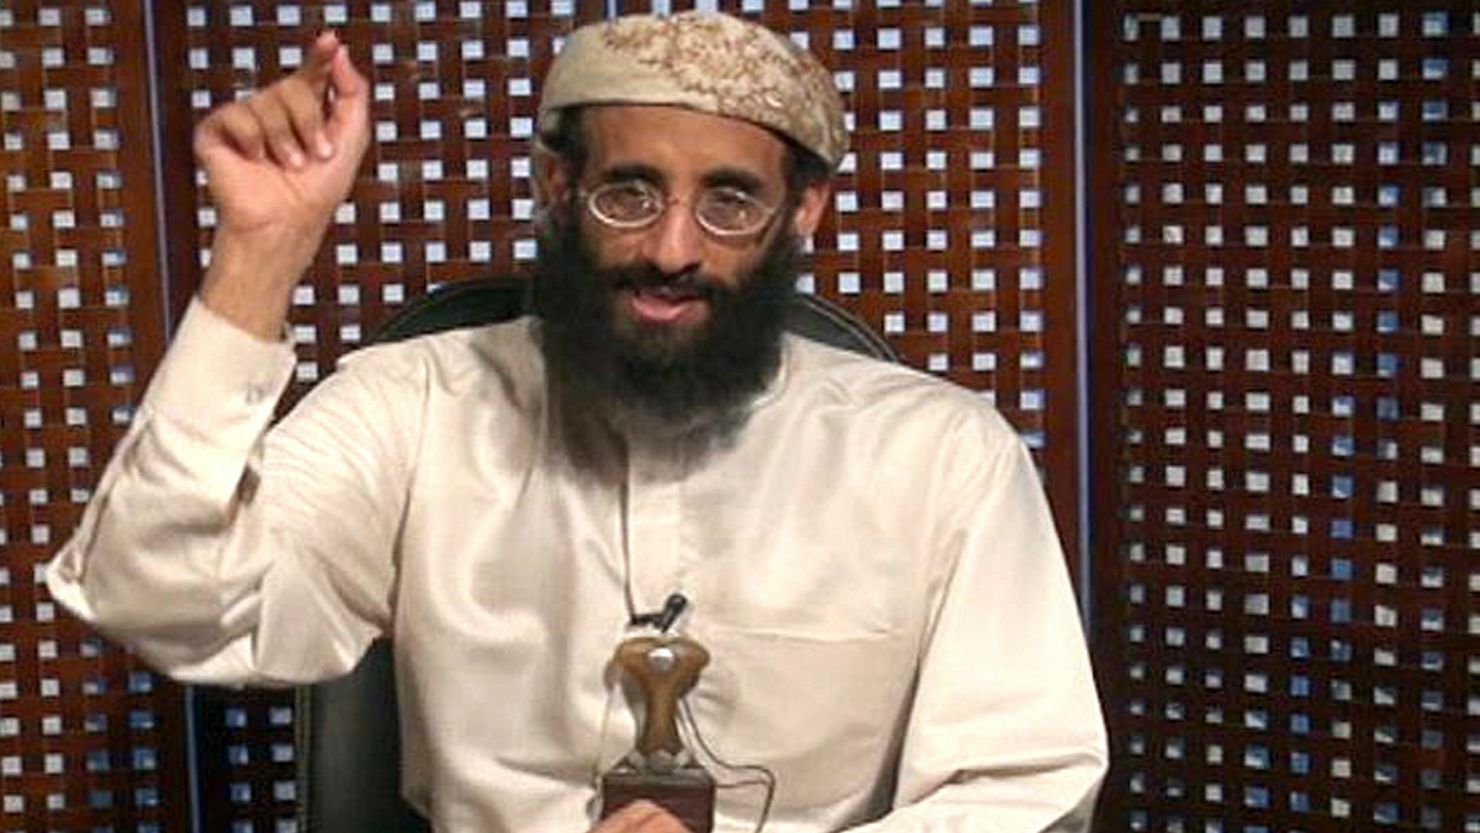 Anwar al-Awlaki was regarded by the United States as one of the biggest threats to homeland security.